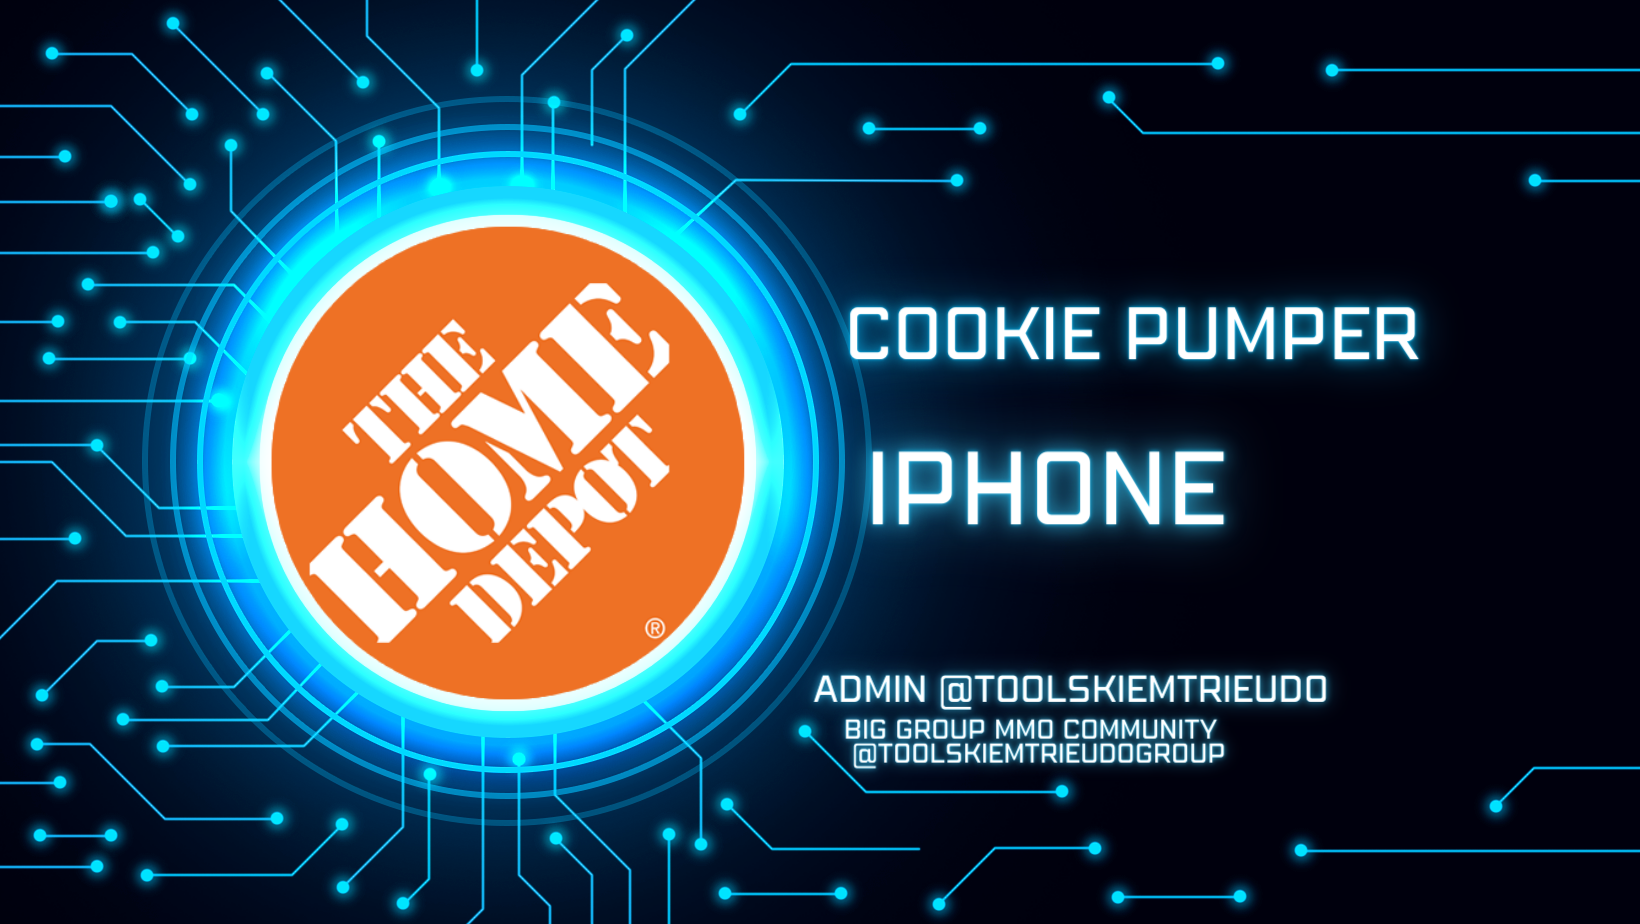 Homedepot Cookie Pumper iPhone Automate Like a Human